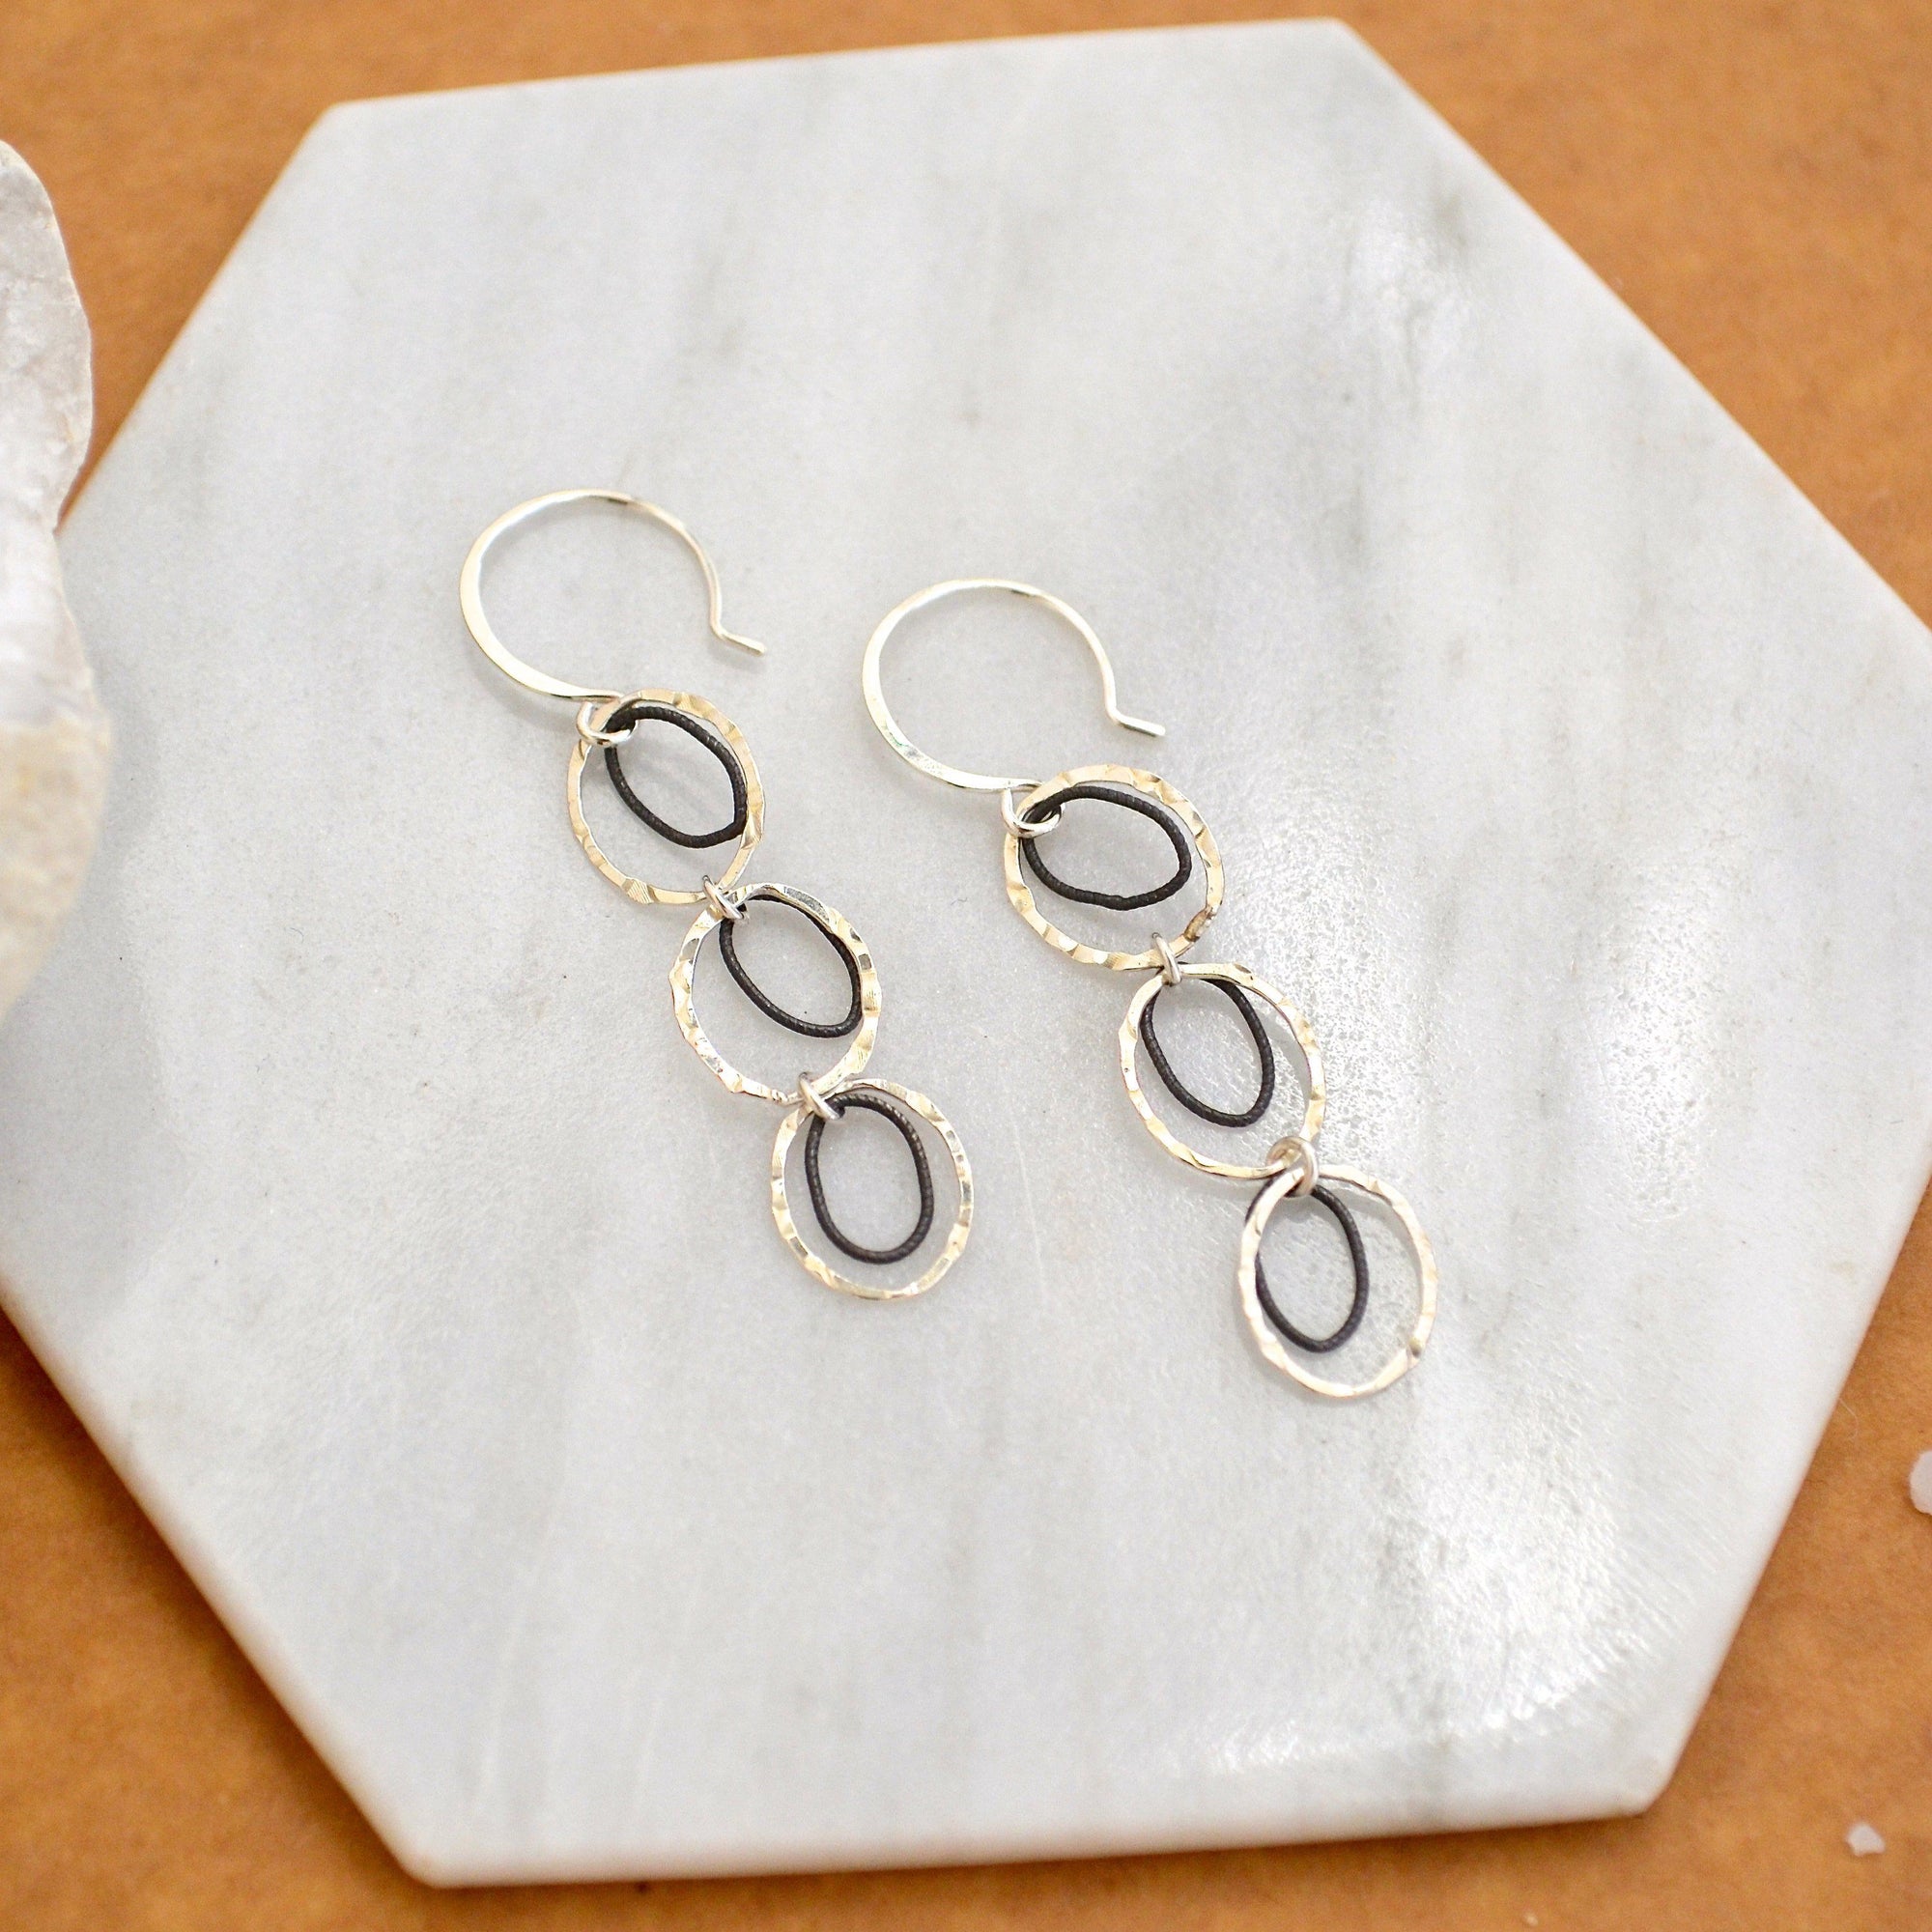 Skipping Stones Earrings - dangling multi circle earrings in gold, silver, or mixed metals - Foamy Wader